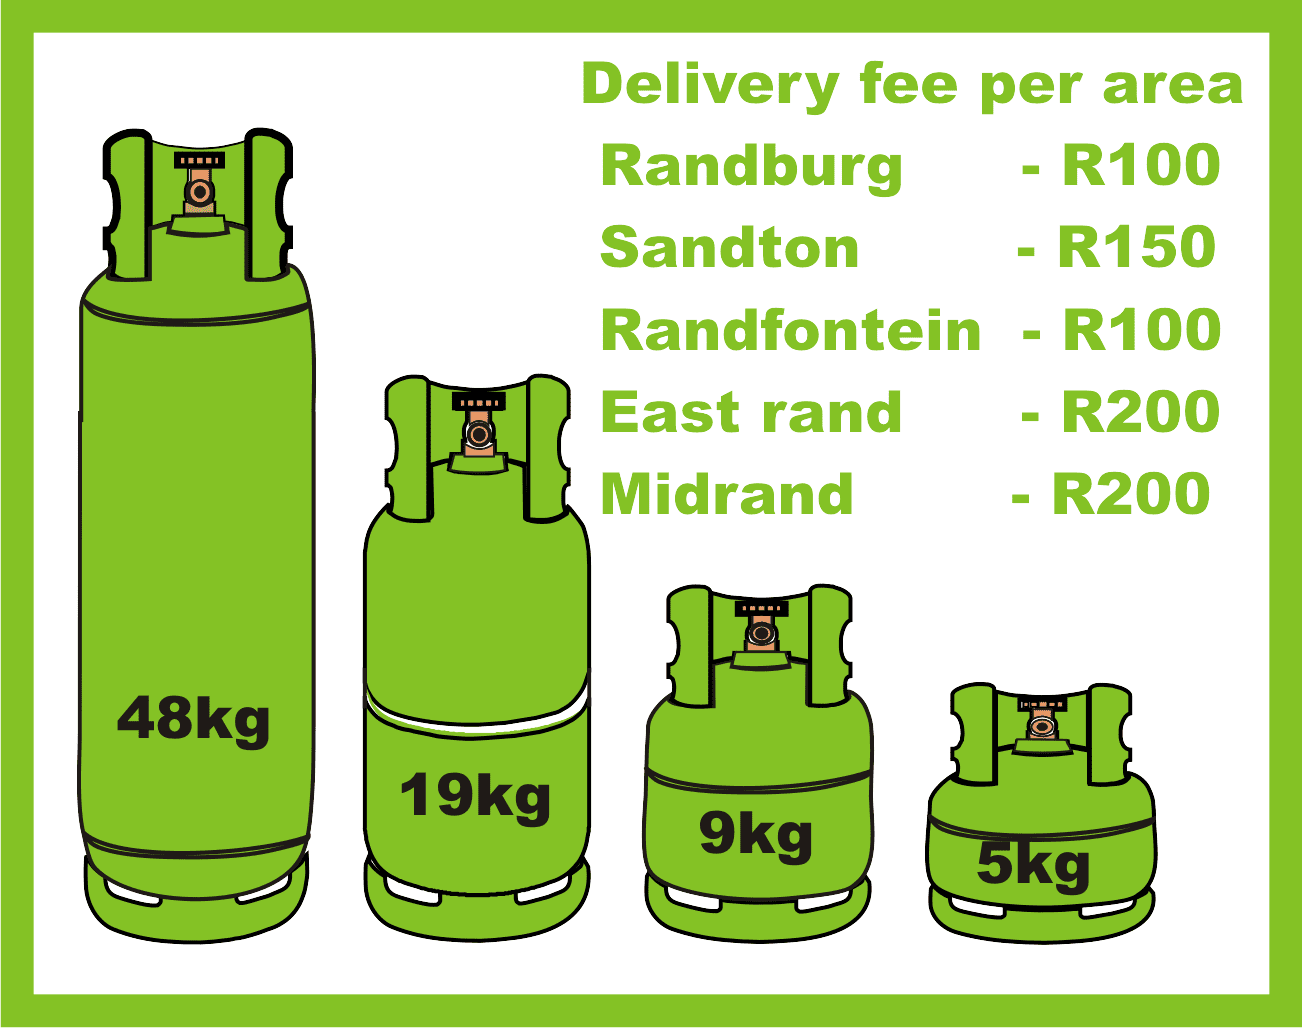 Delivery prices